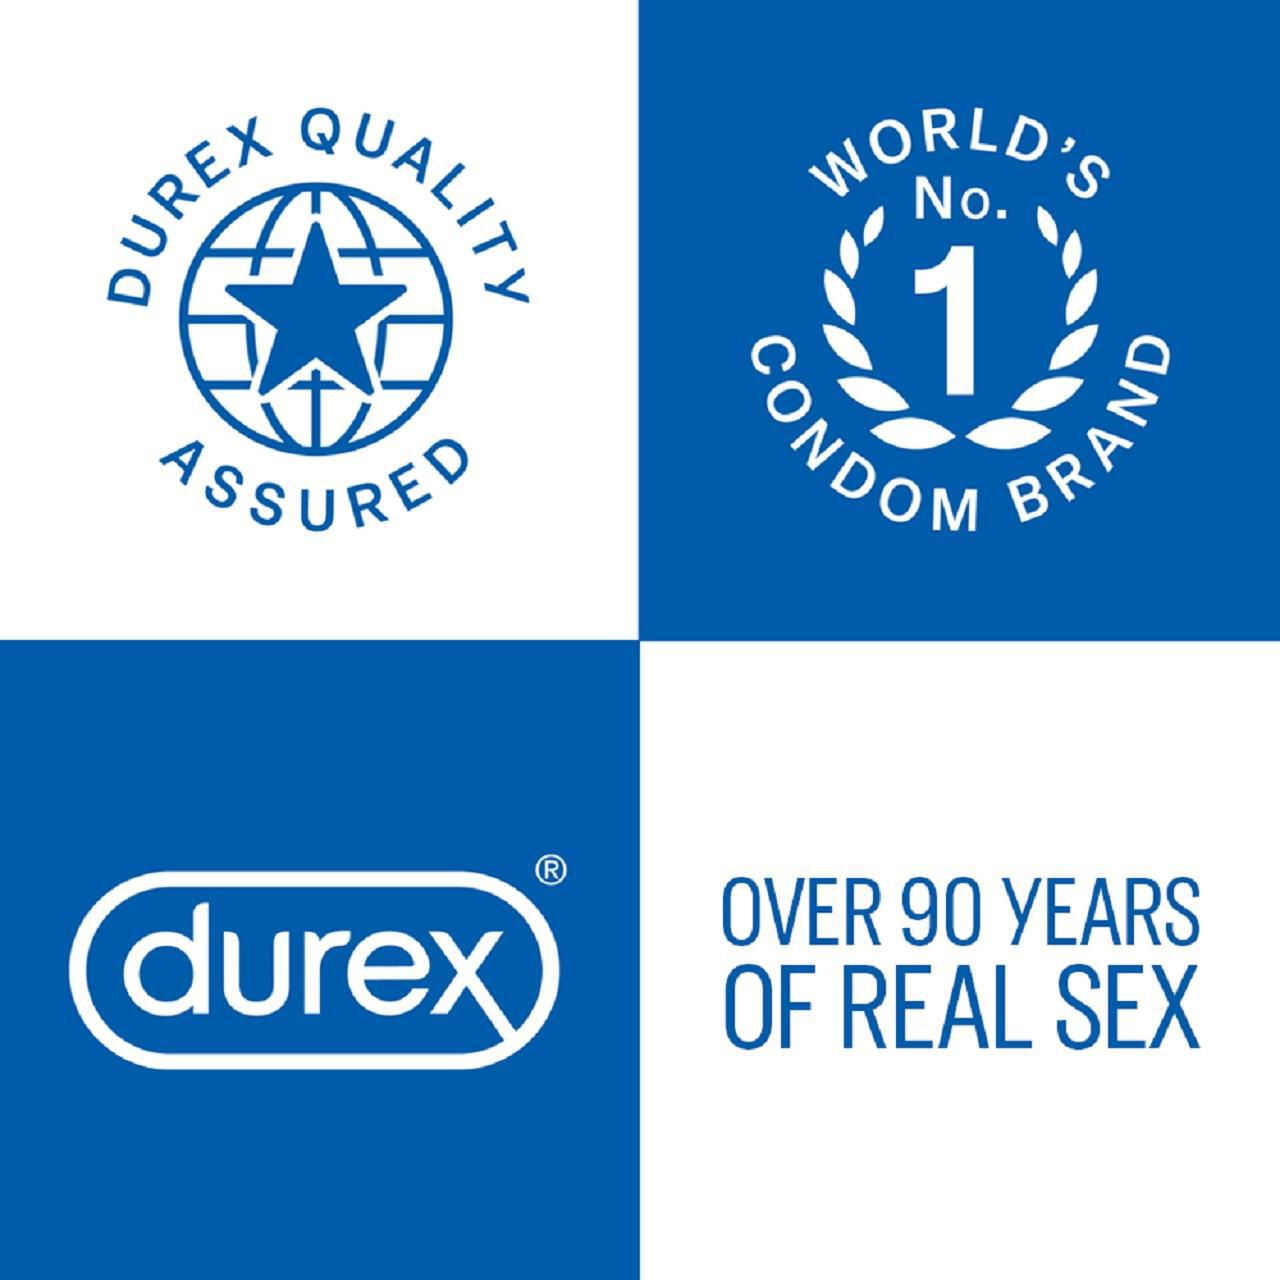 Durex Pleasure Me Ribbed and Dotted 12 Condoms 12 per pack